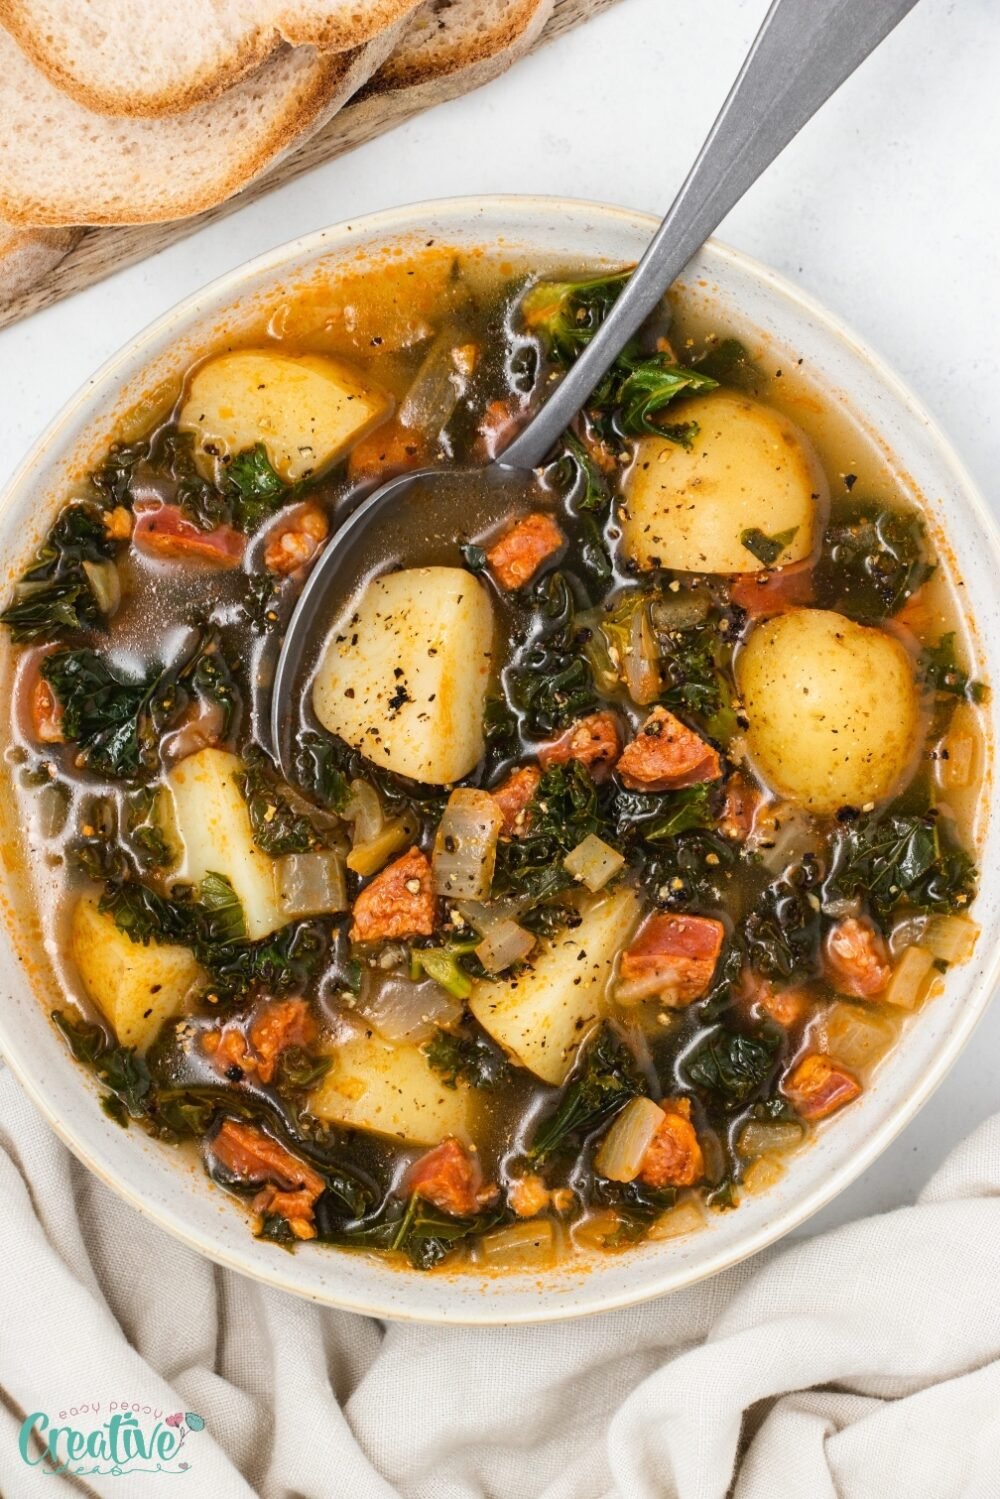 A bowl of chorizo and kale soup with potatoes, chorizo, and kale, served hot and garnished with fresh herbs.